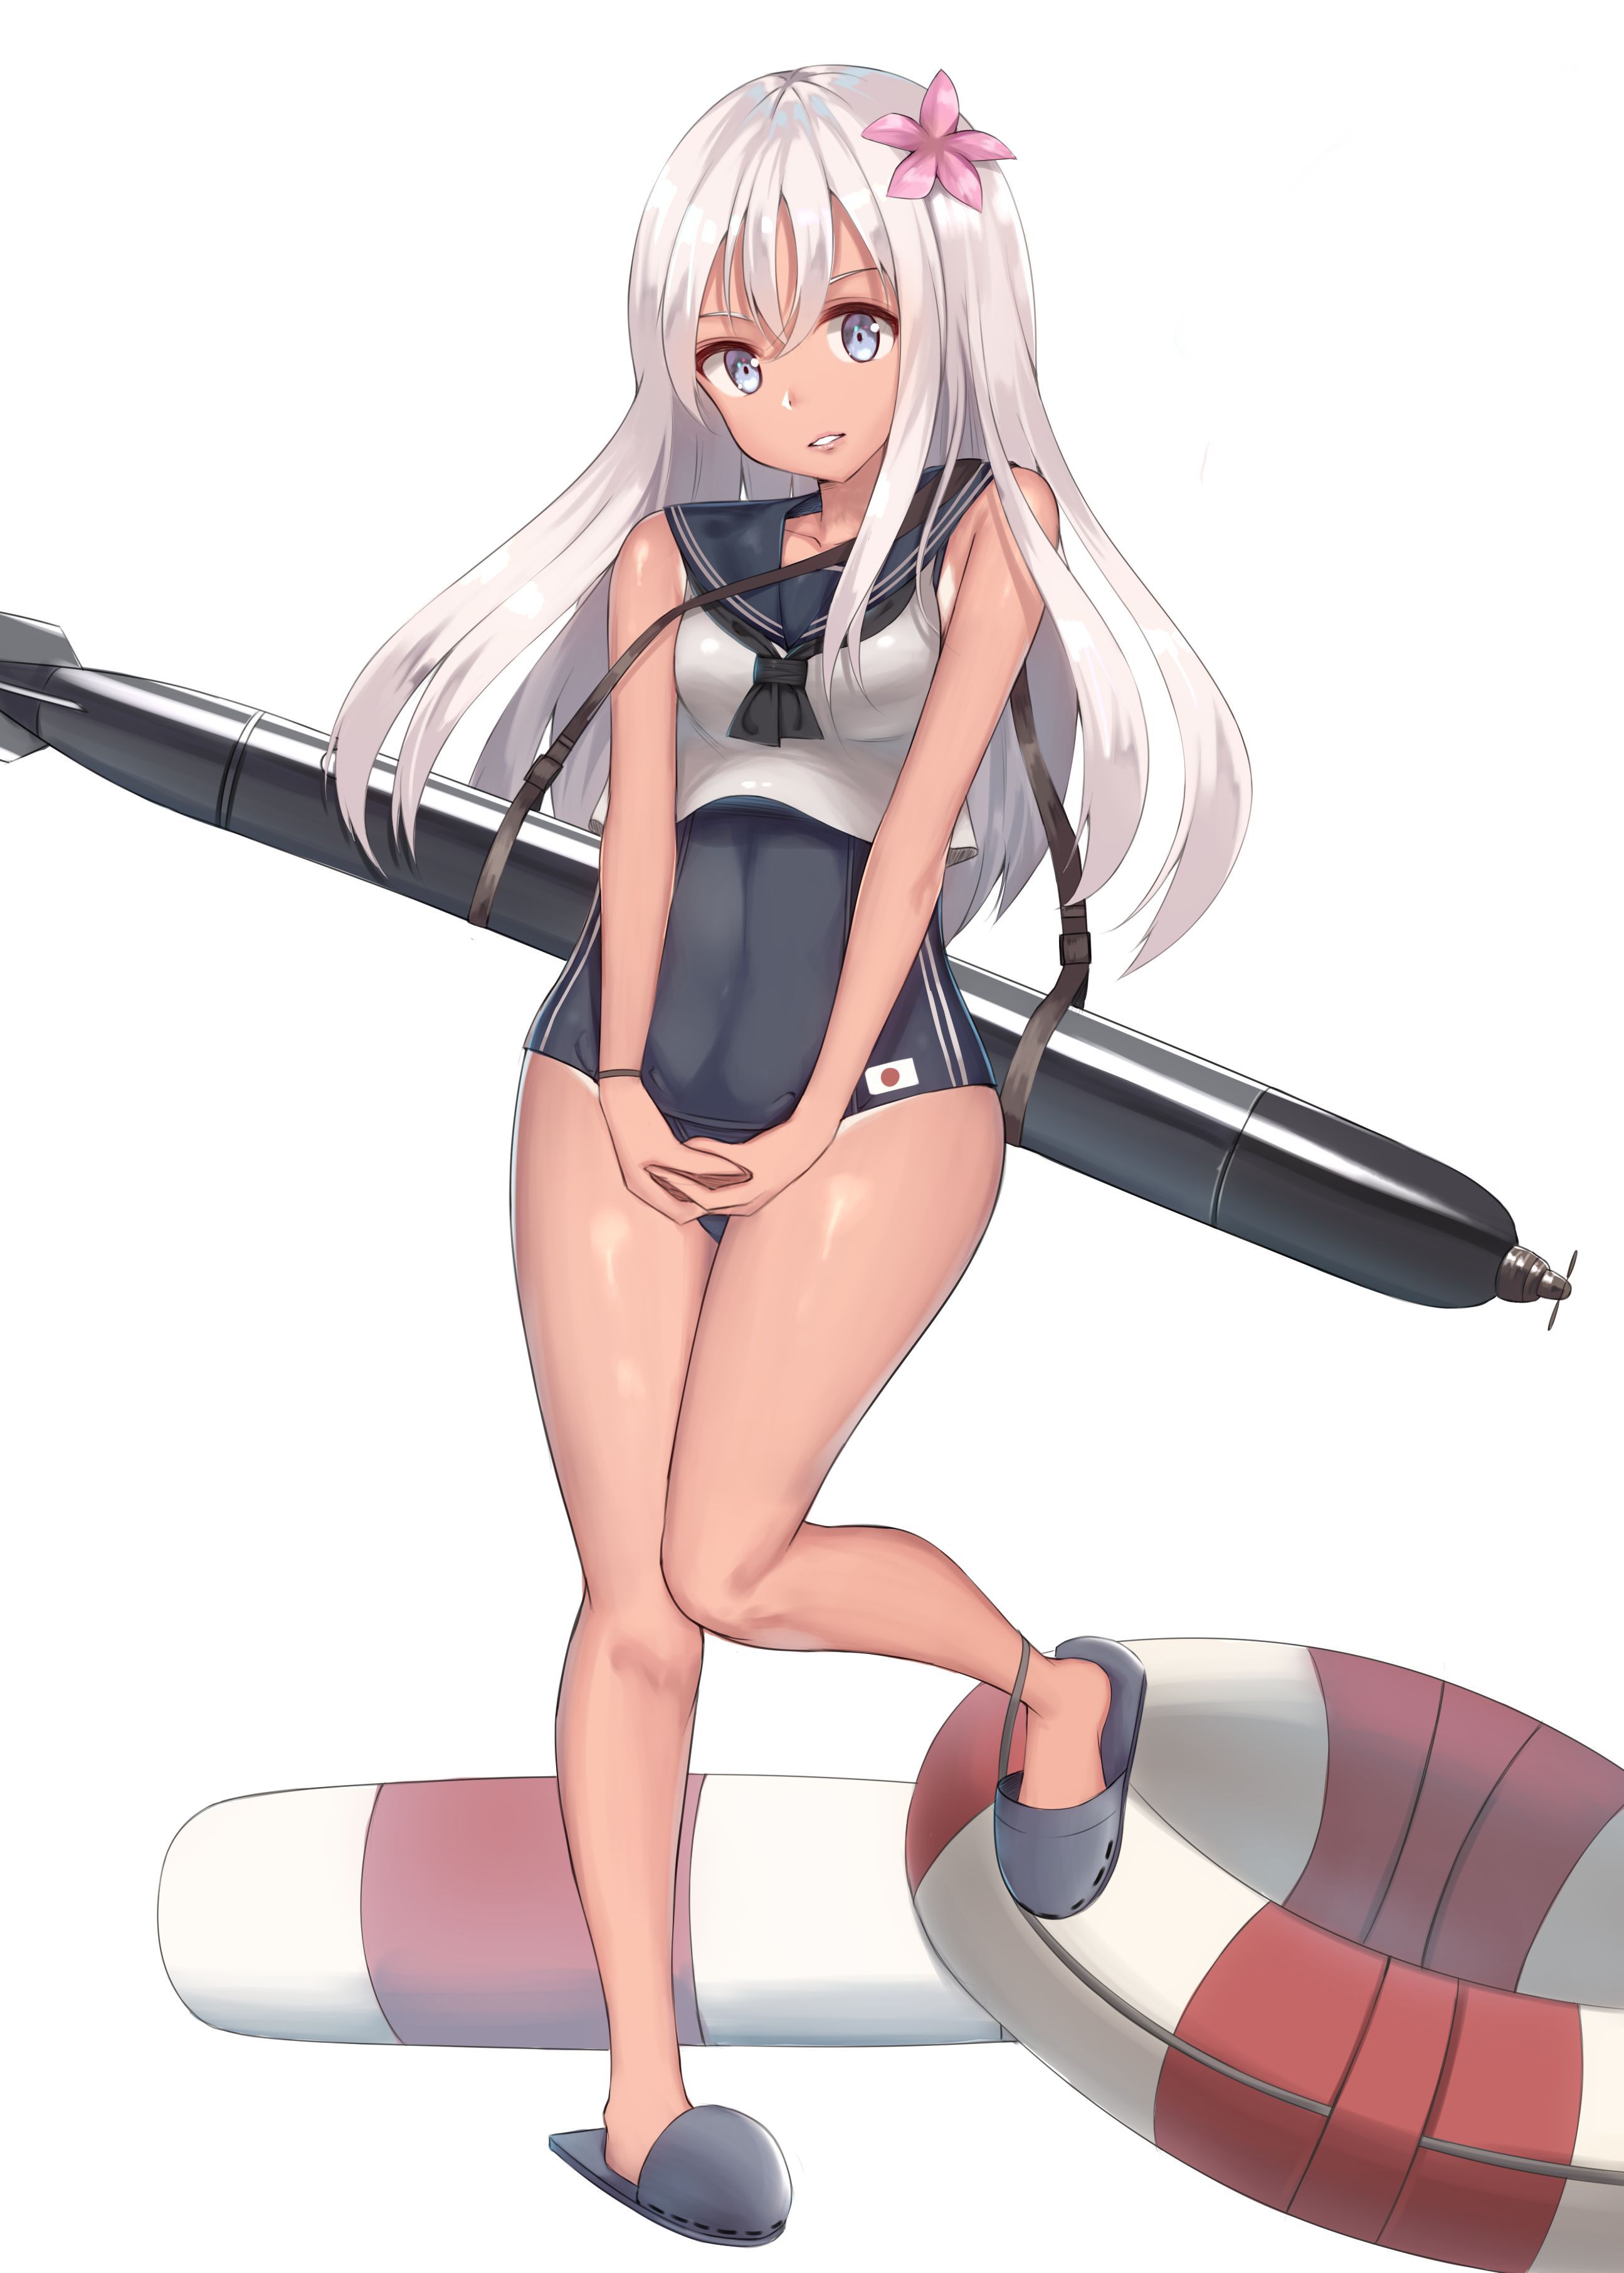 [the second] The SUQQU water sunburn daughter of warship this (fleet これくしょん), ロリエロ image summary of 呂 500, also known as the low No. 13 [20 pieces]! 9